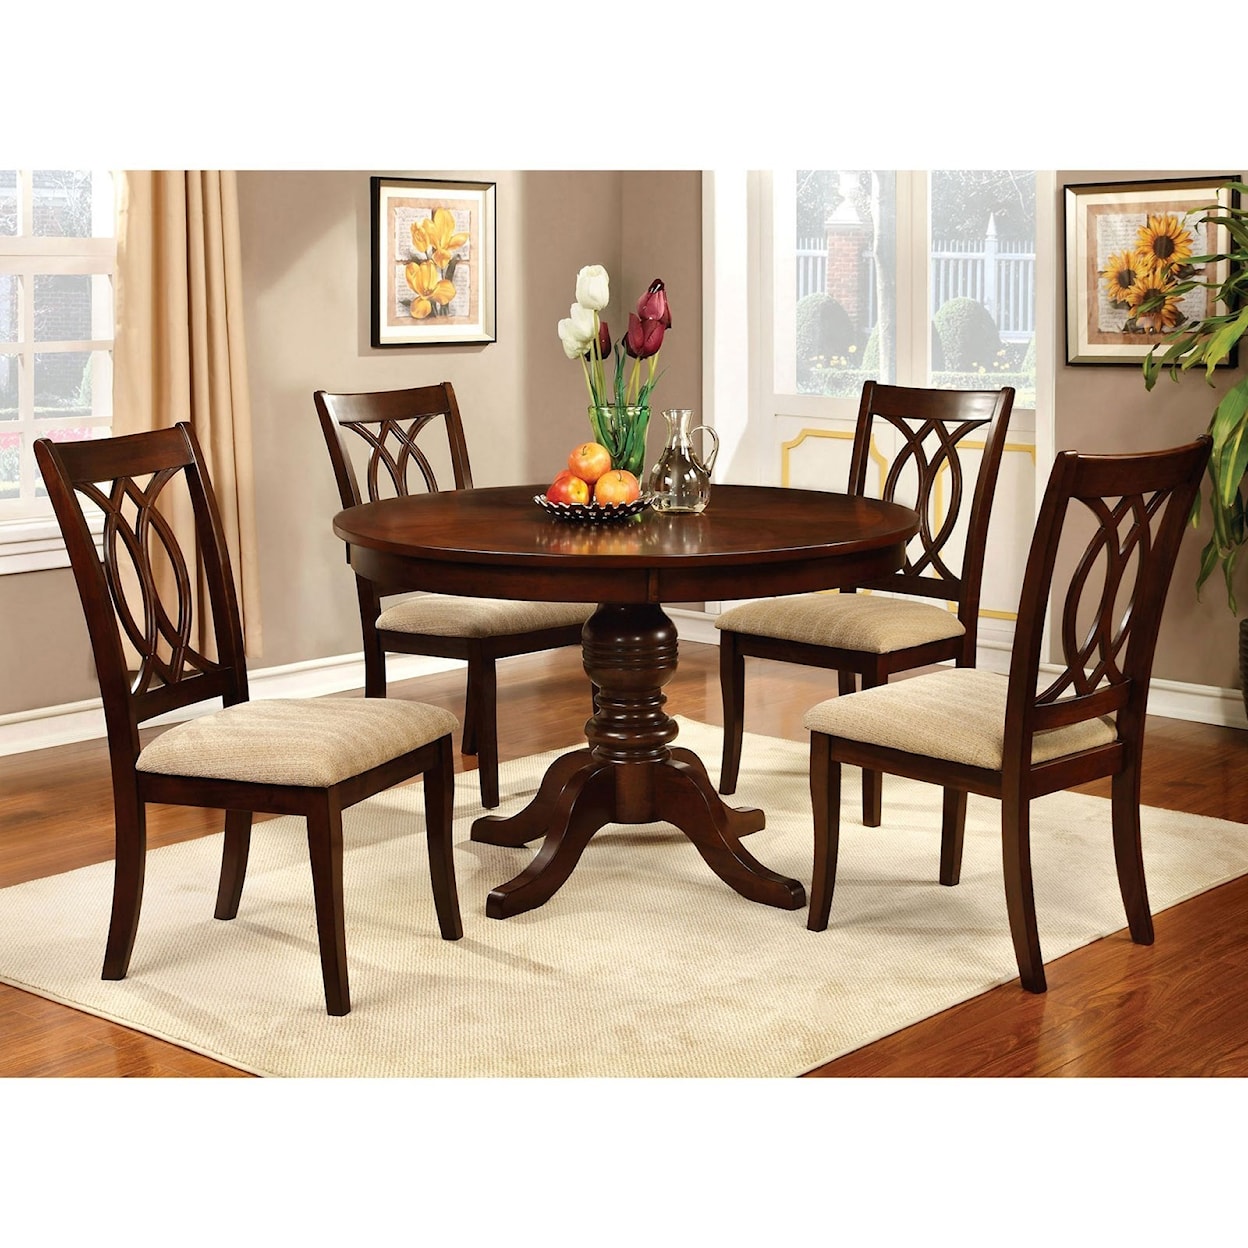 Furniture of America Carlisle1 Dining Table and Chair Set 